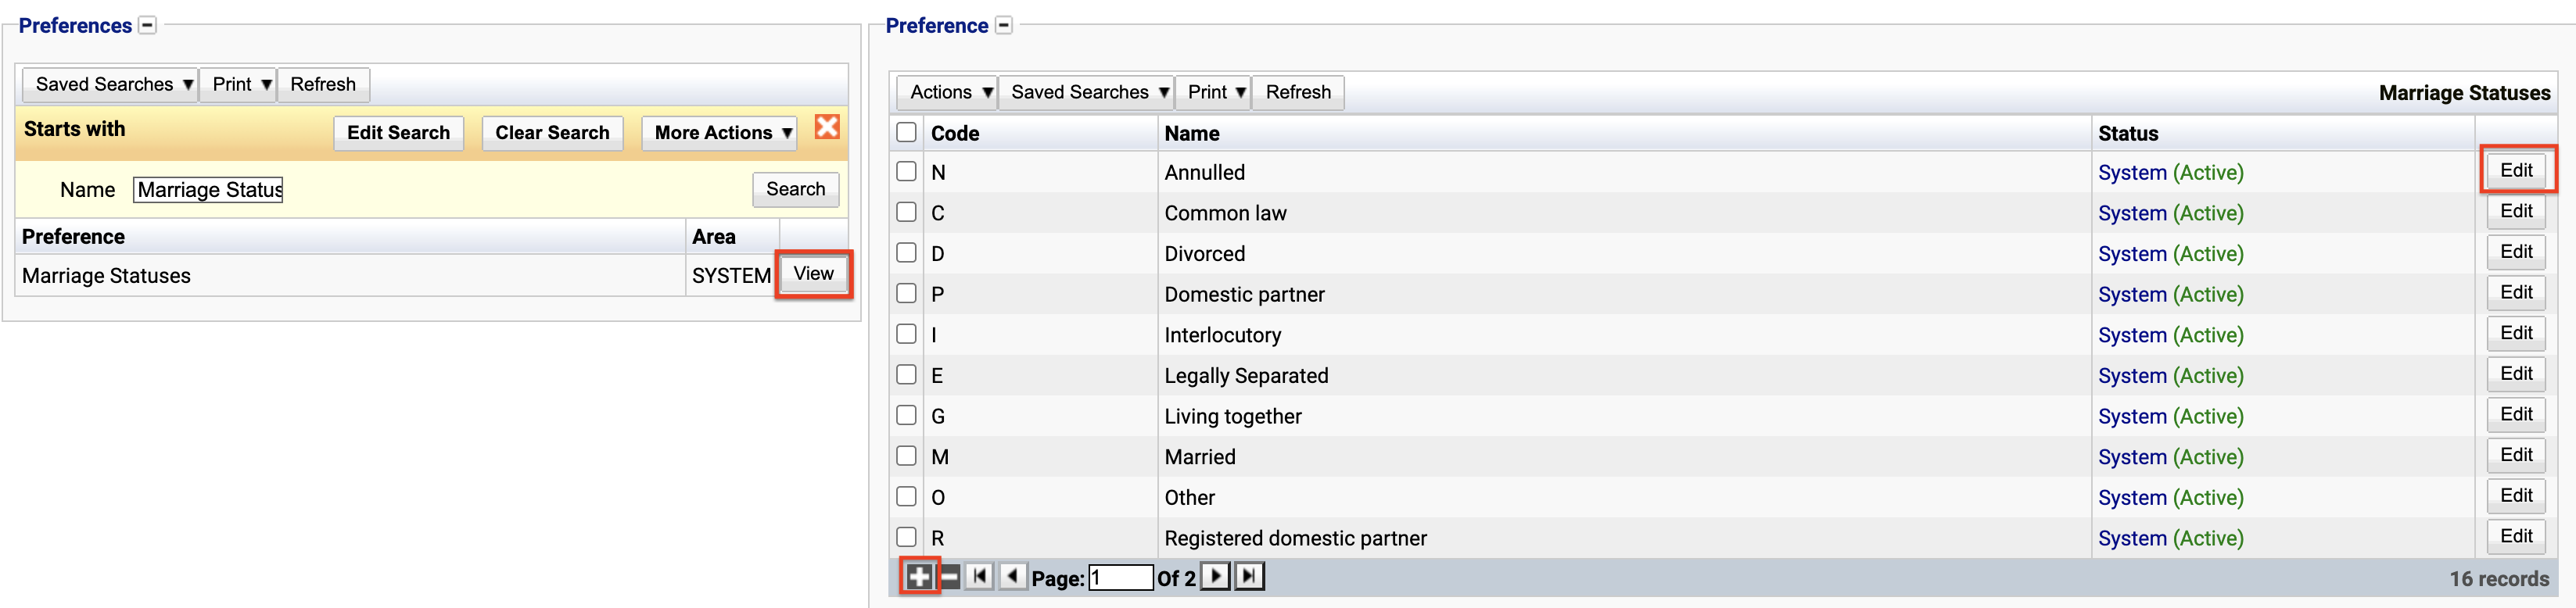 Finding the marriage status preference in the preference list.